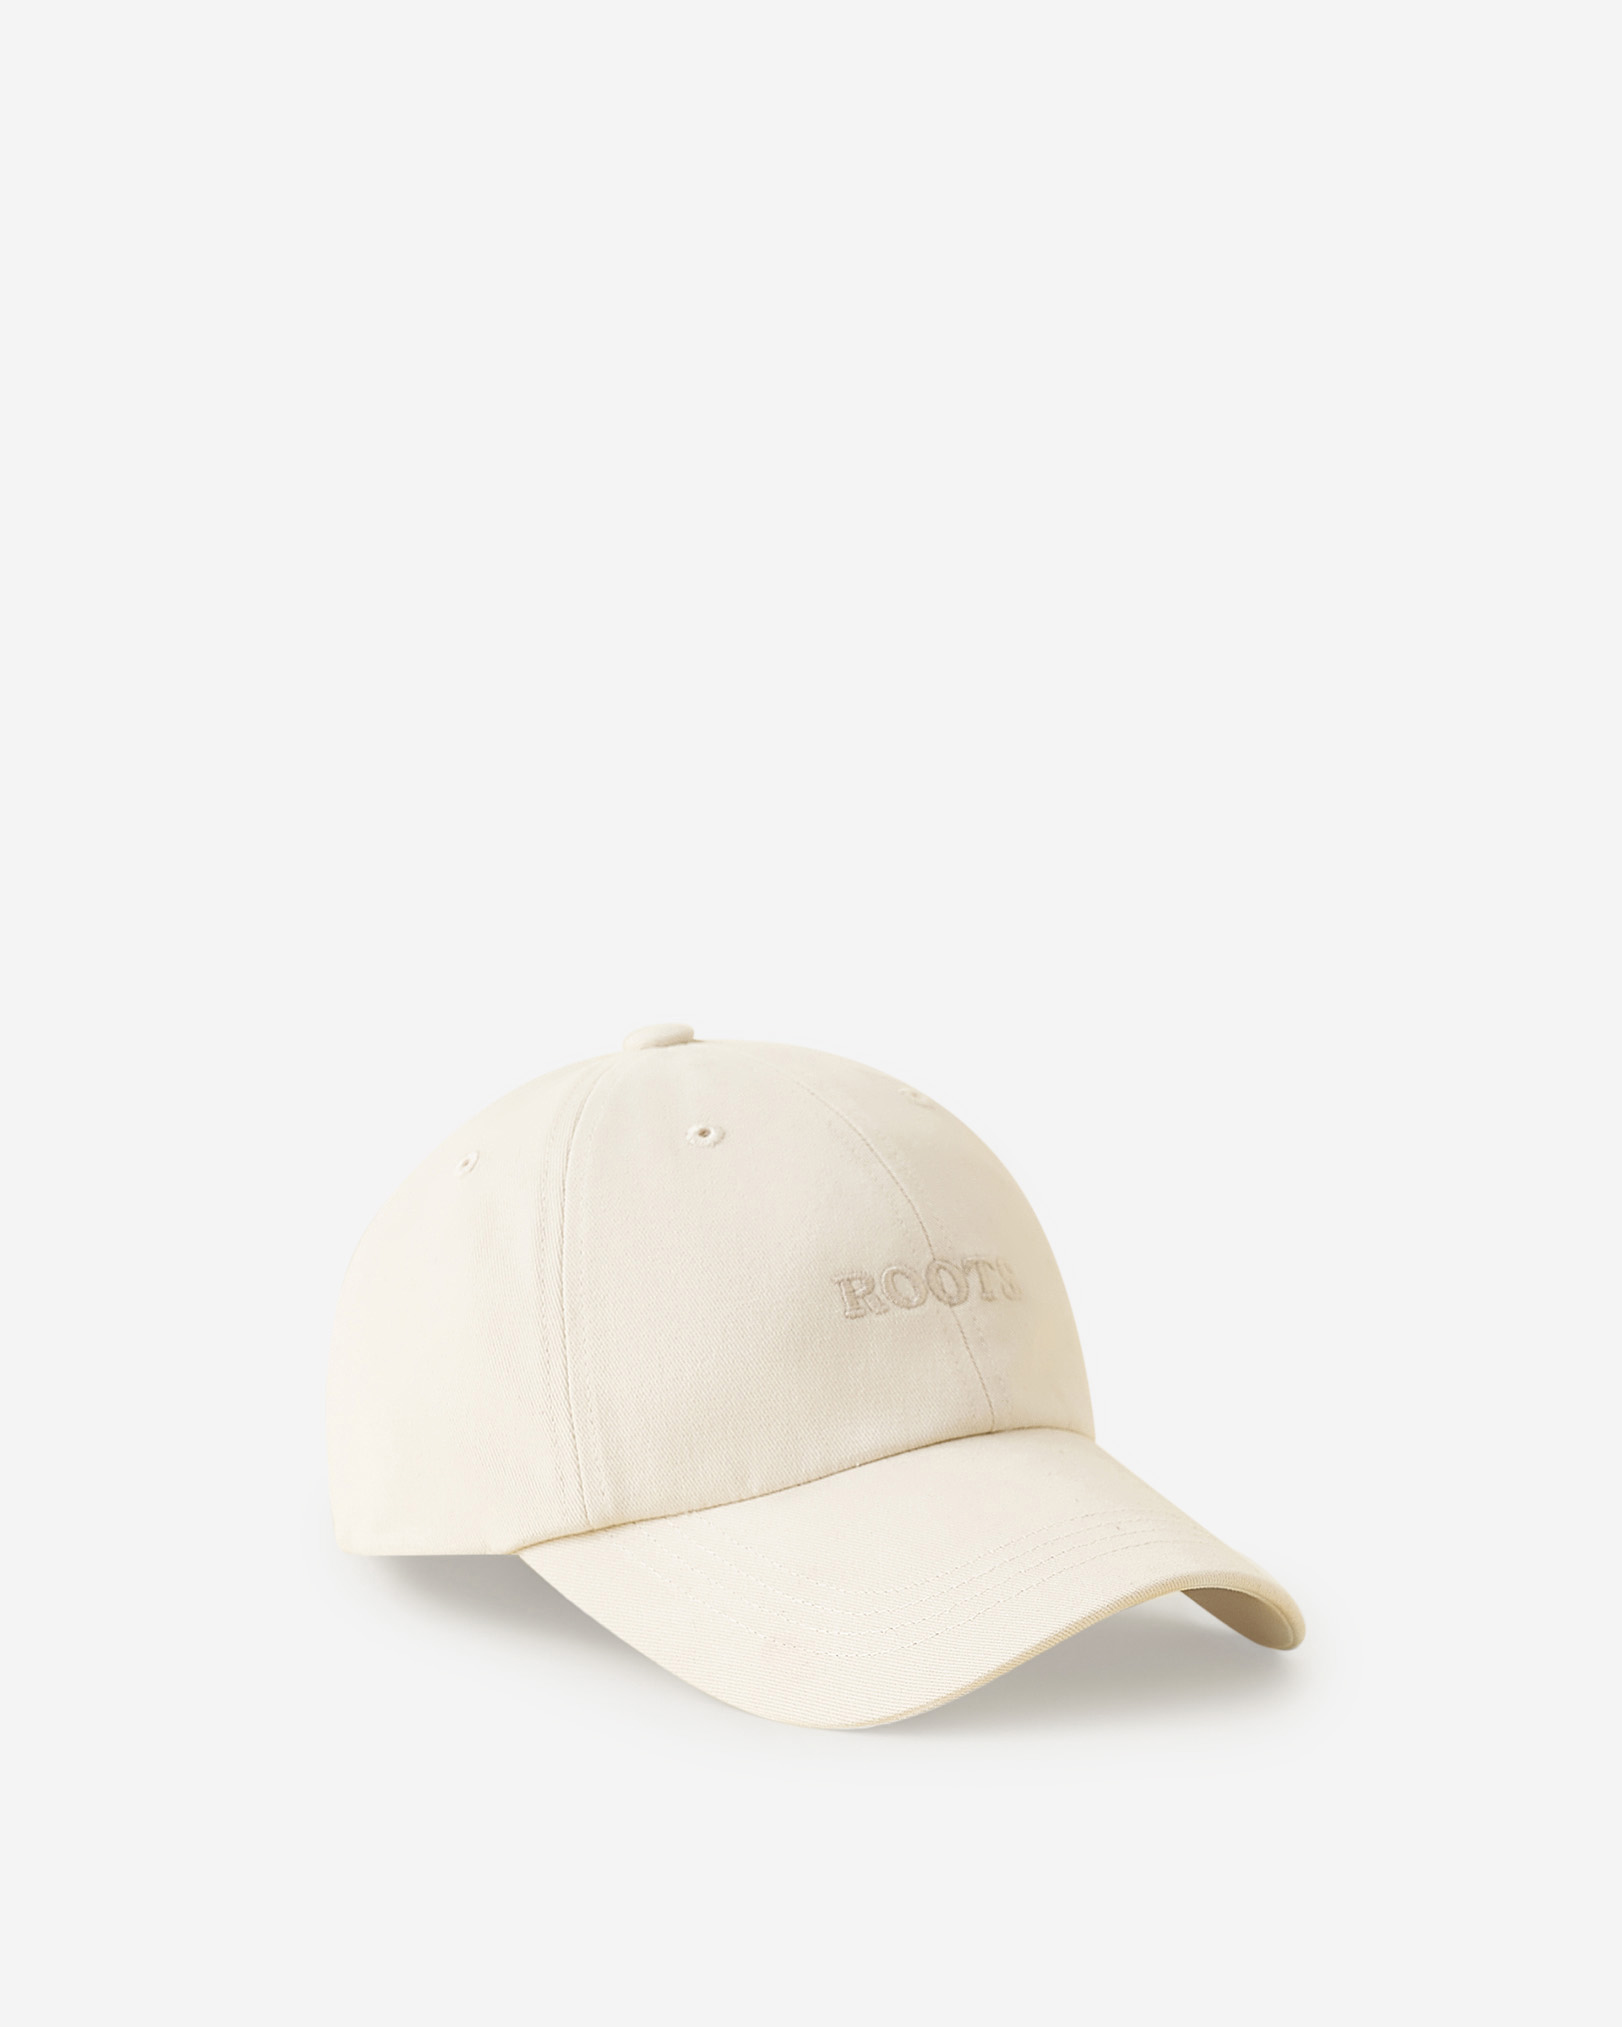 Roots Baseball Cap Hat in Summer Sand